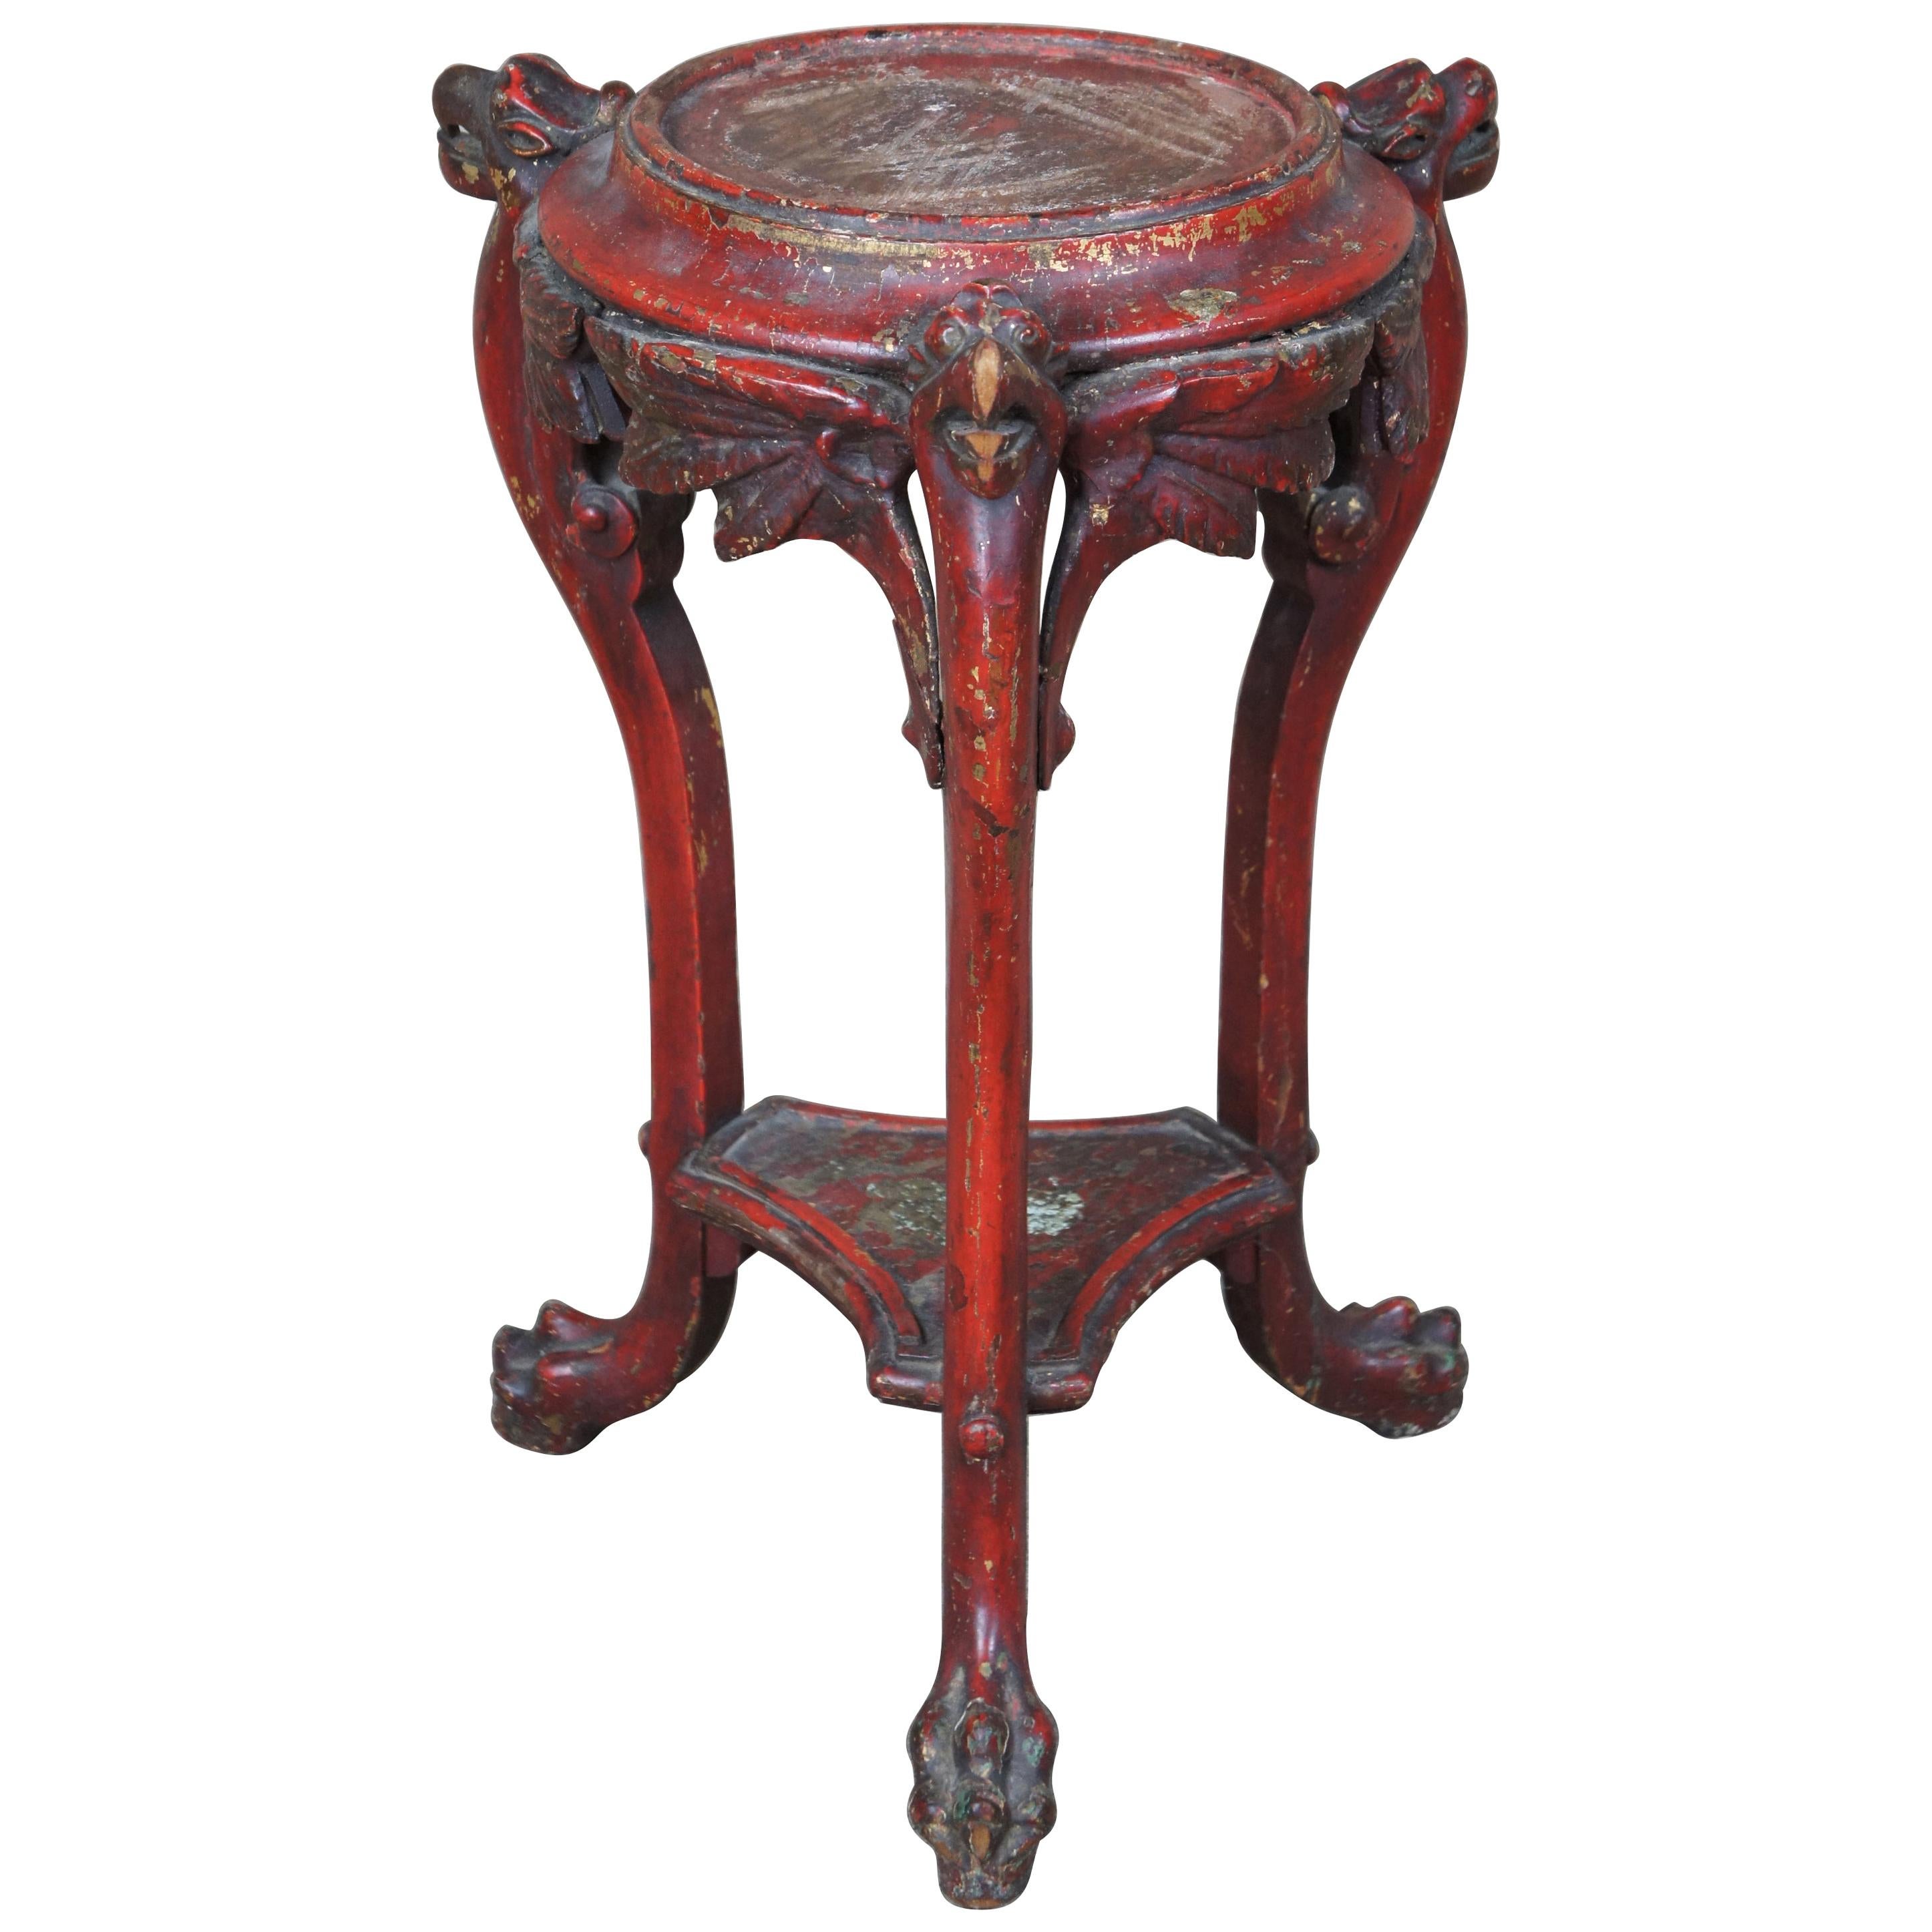 Antique Red Figural Dragon Pedestal Claw Foot Accent Table Plant Stand Griffin